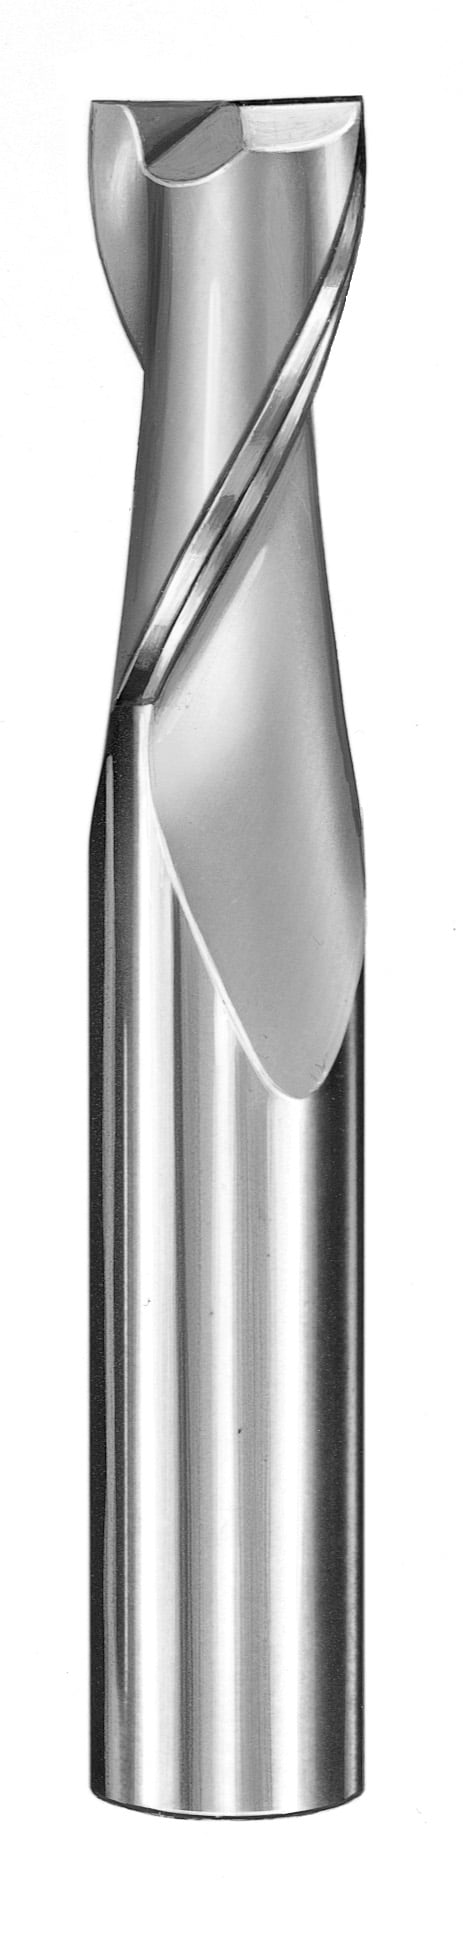 1/4" Dia, 2 Flute, Square End End Mill - 30331